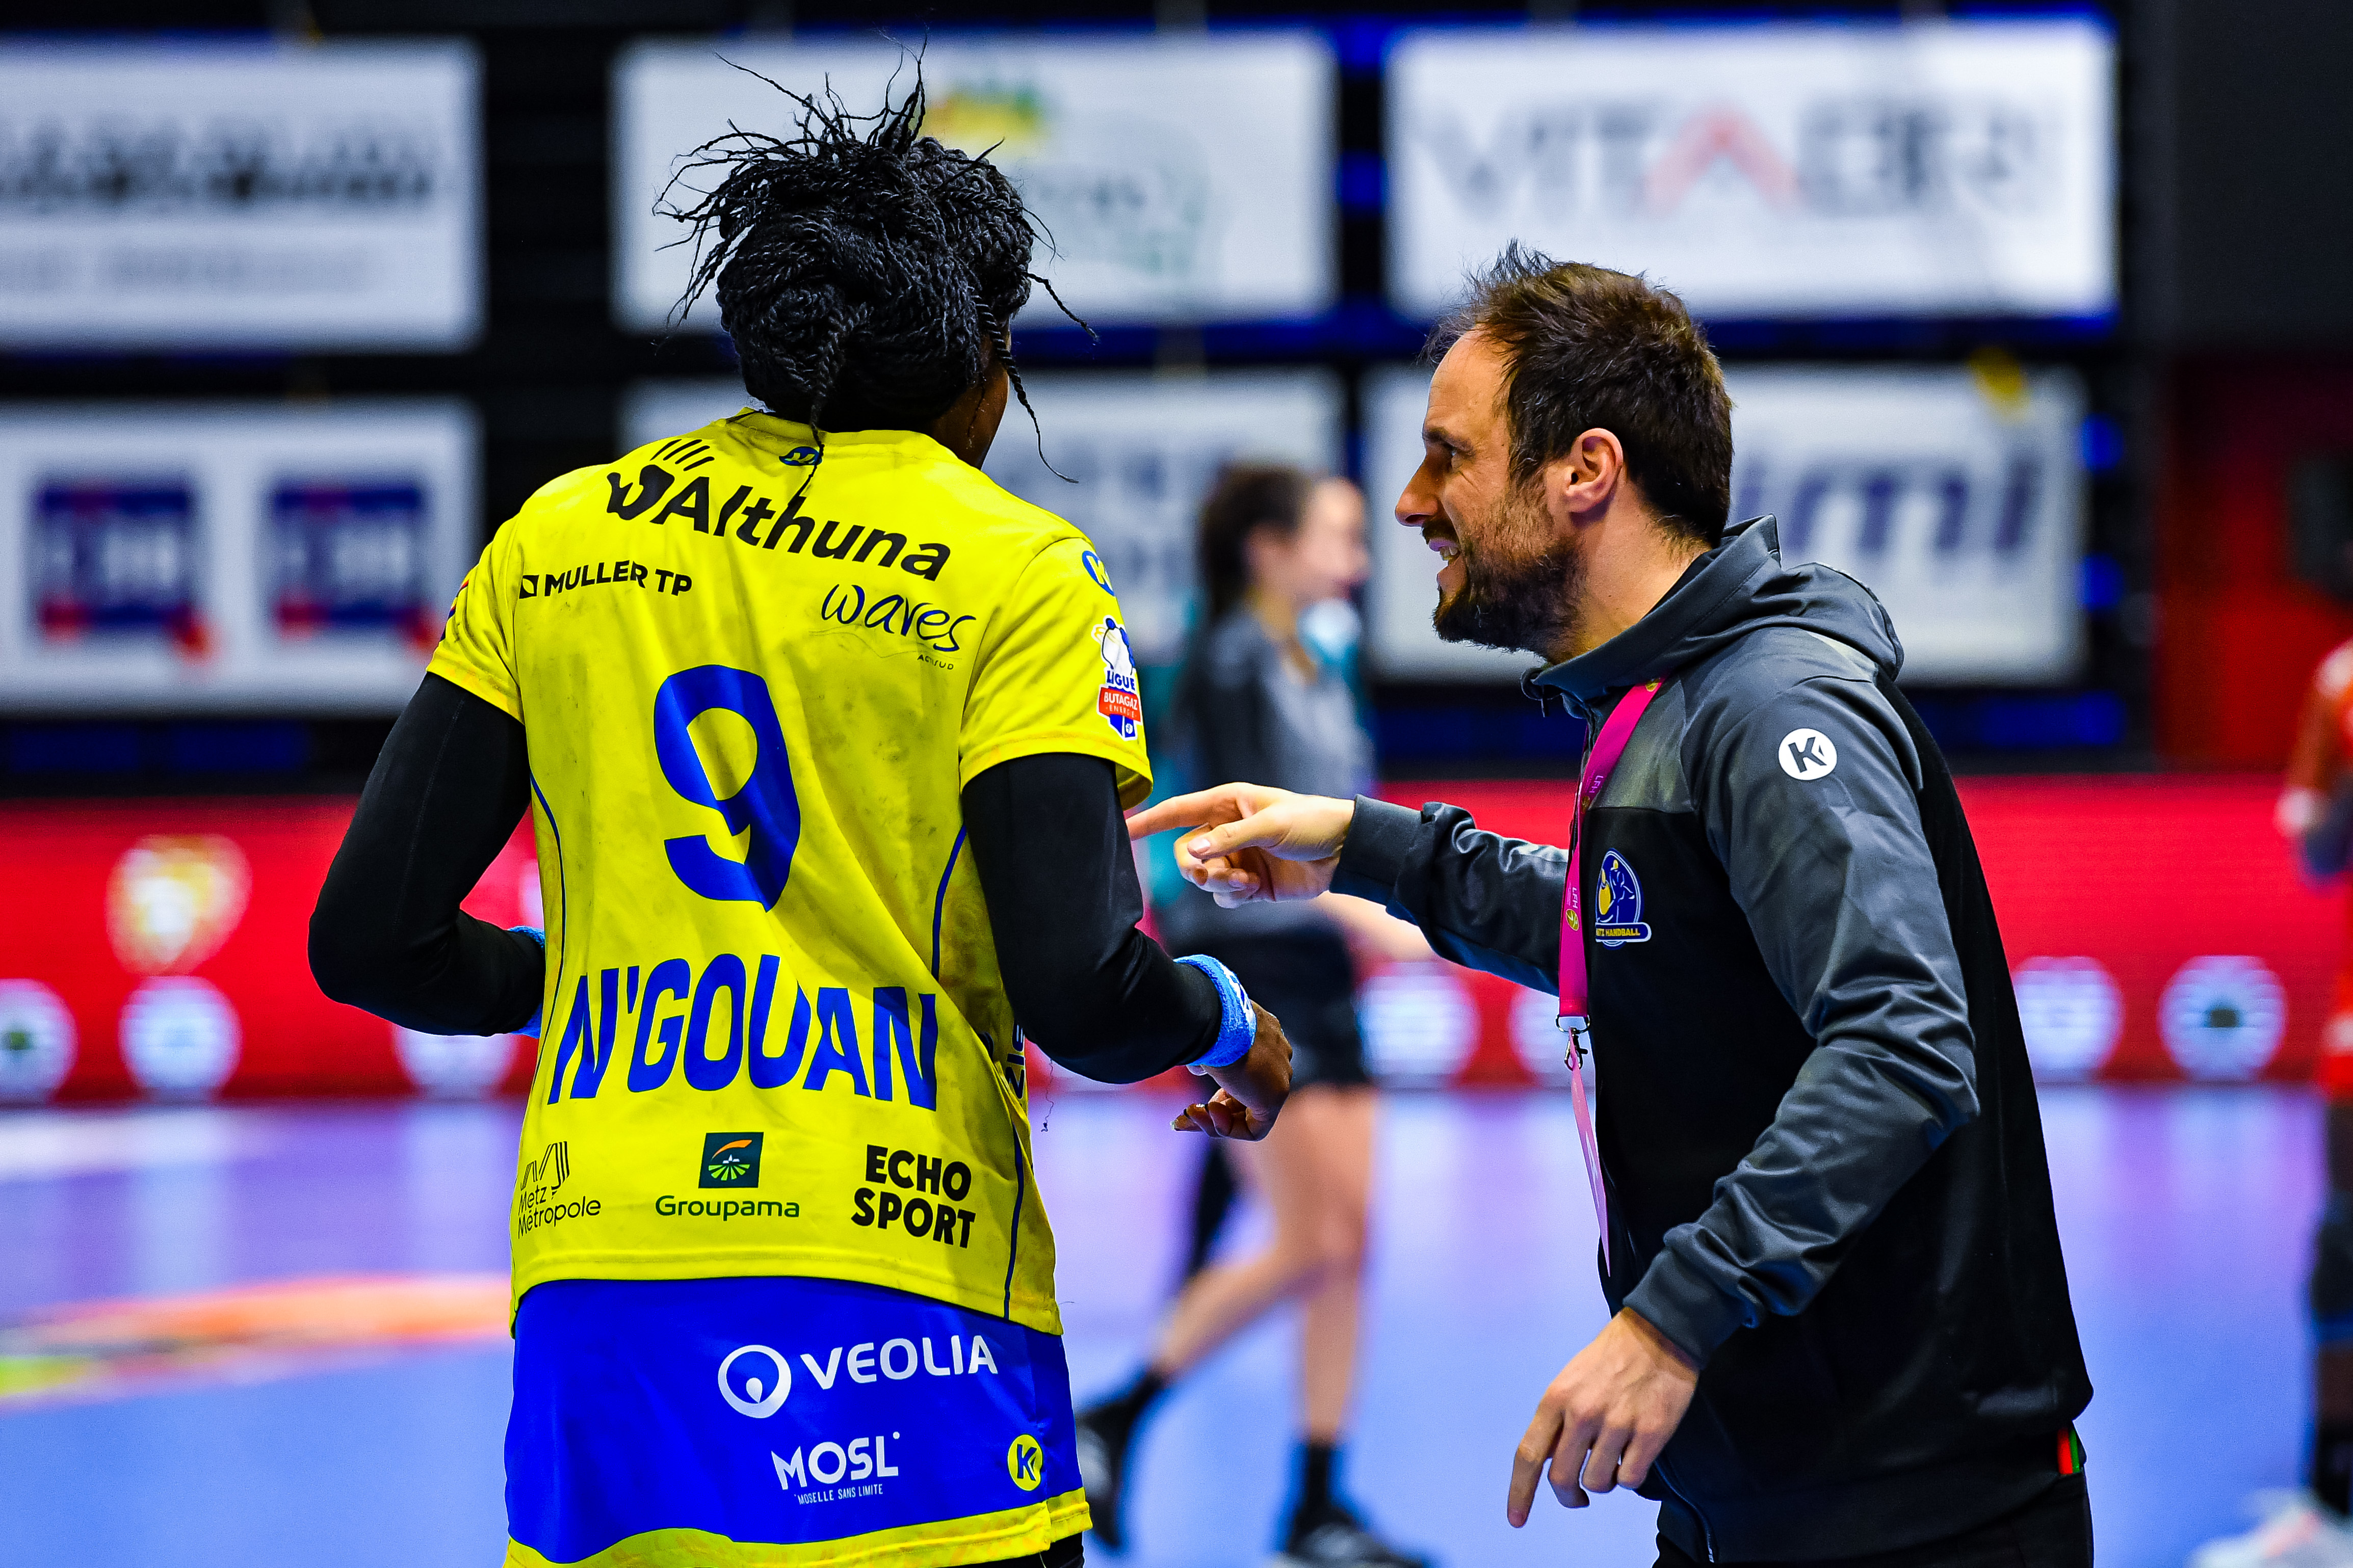 Emmanuel MAYONNADE head coach of Metz gives instructions to Astride NGOUAN of Metz during the French Ligue Butagaz Energie women’s handball match between Besancon and Metz on February 2, 2022 in Besancon, France. (Photo by Baptiste Fernandez/Icon Sport)